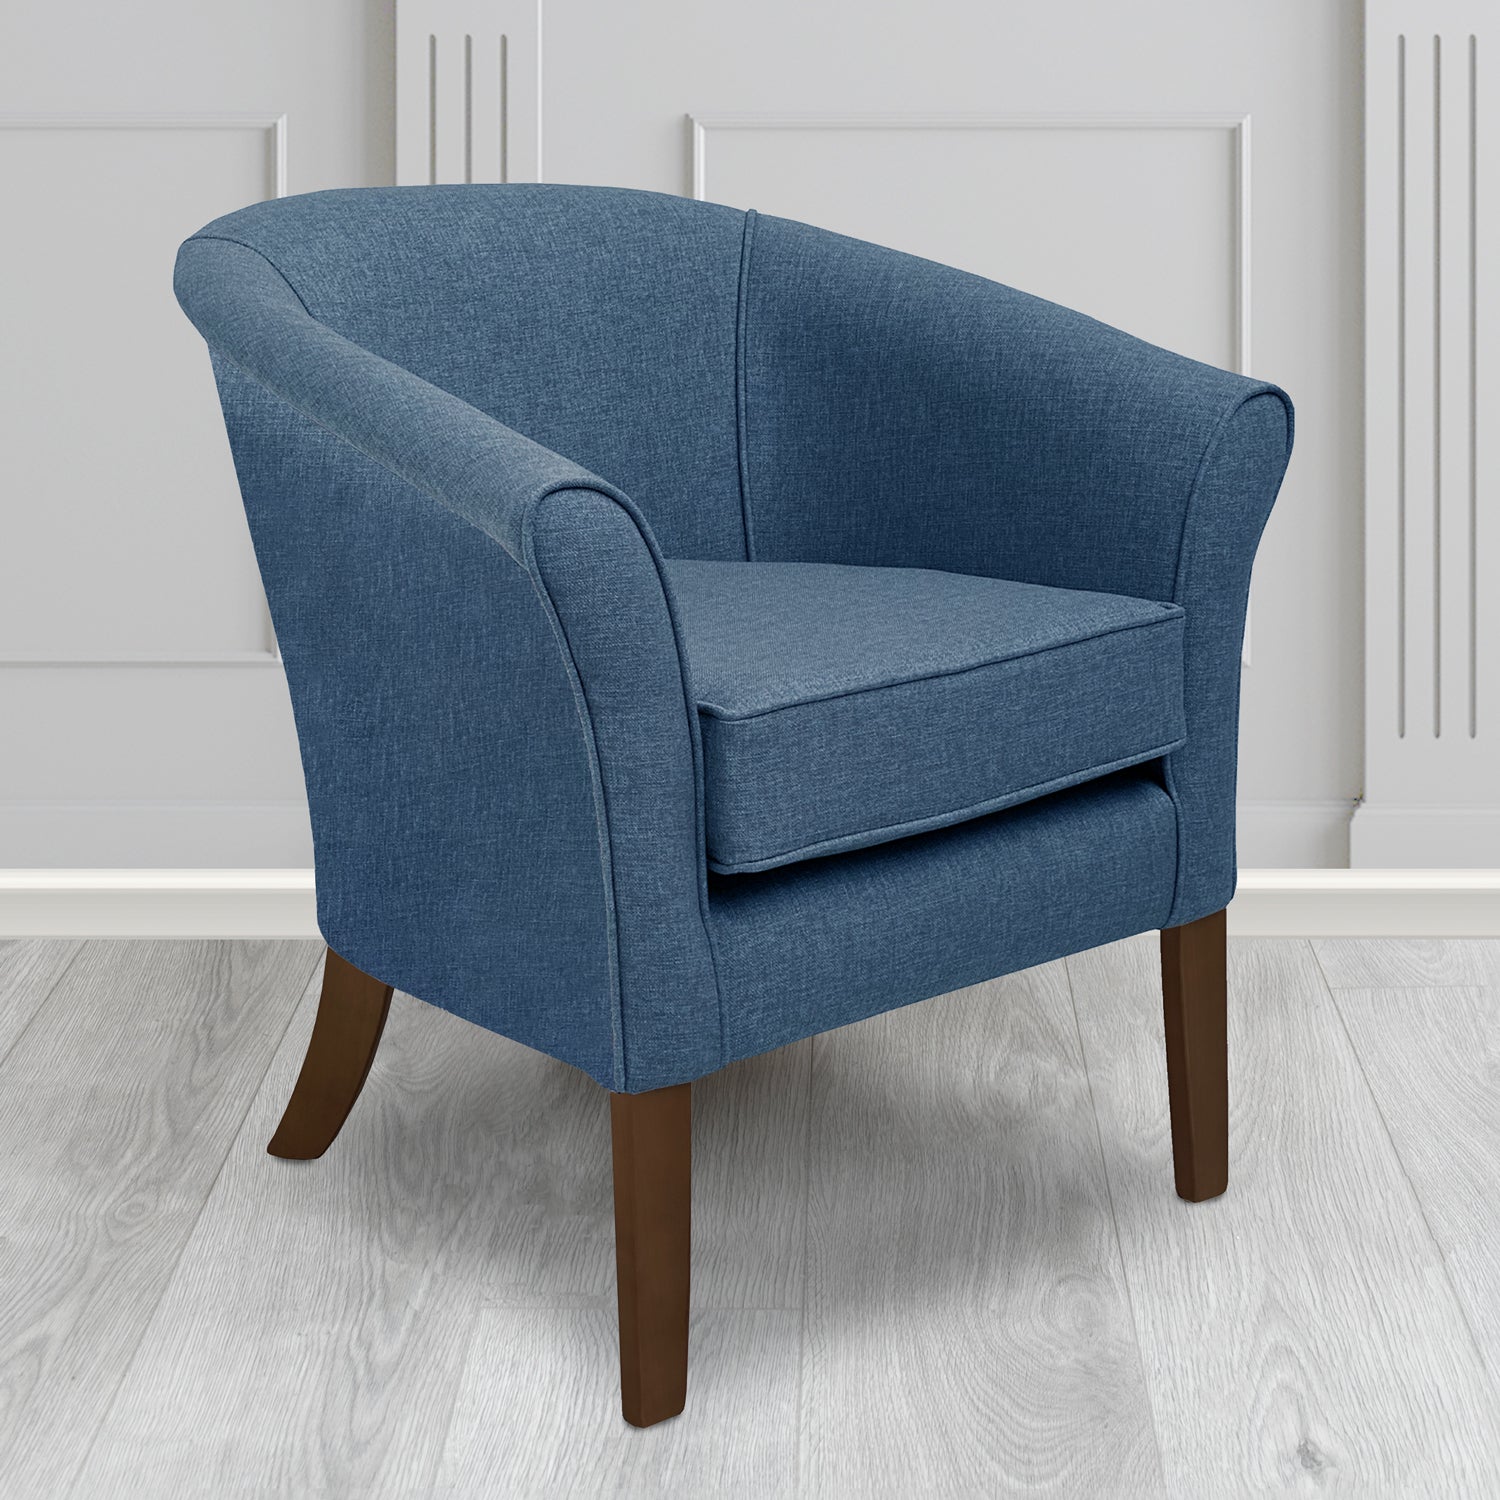 Aspen Tub Chair in Marna 103 Denim Crib 5 Fabric - Antimicrobial, Stain Resistant & Waterproof - The Tub Chair Shop